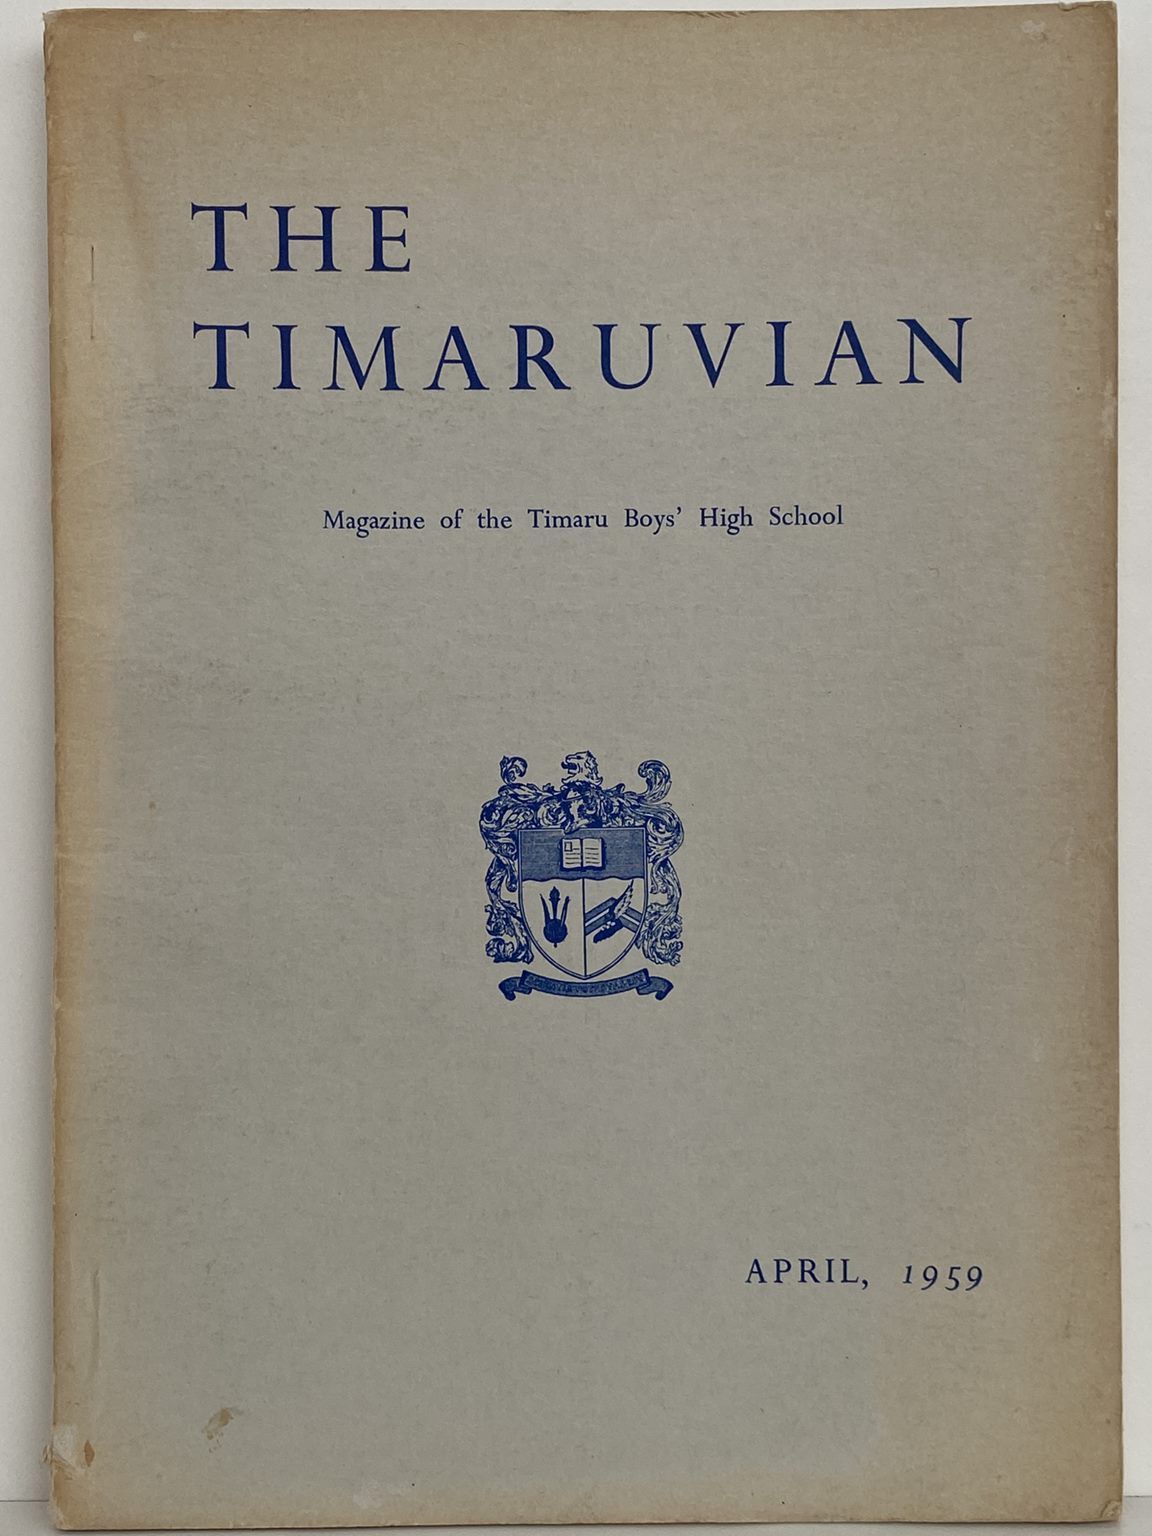 THE TIMARUVIAN: Magazine of the Timaru Boys' High School and its Old Boys' Association 1959